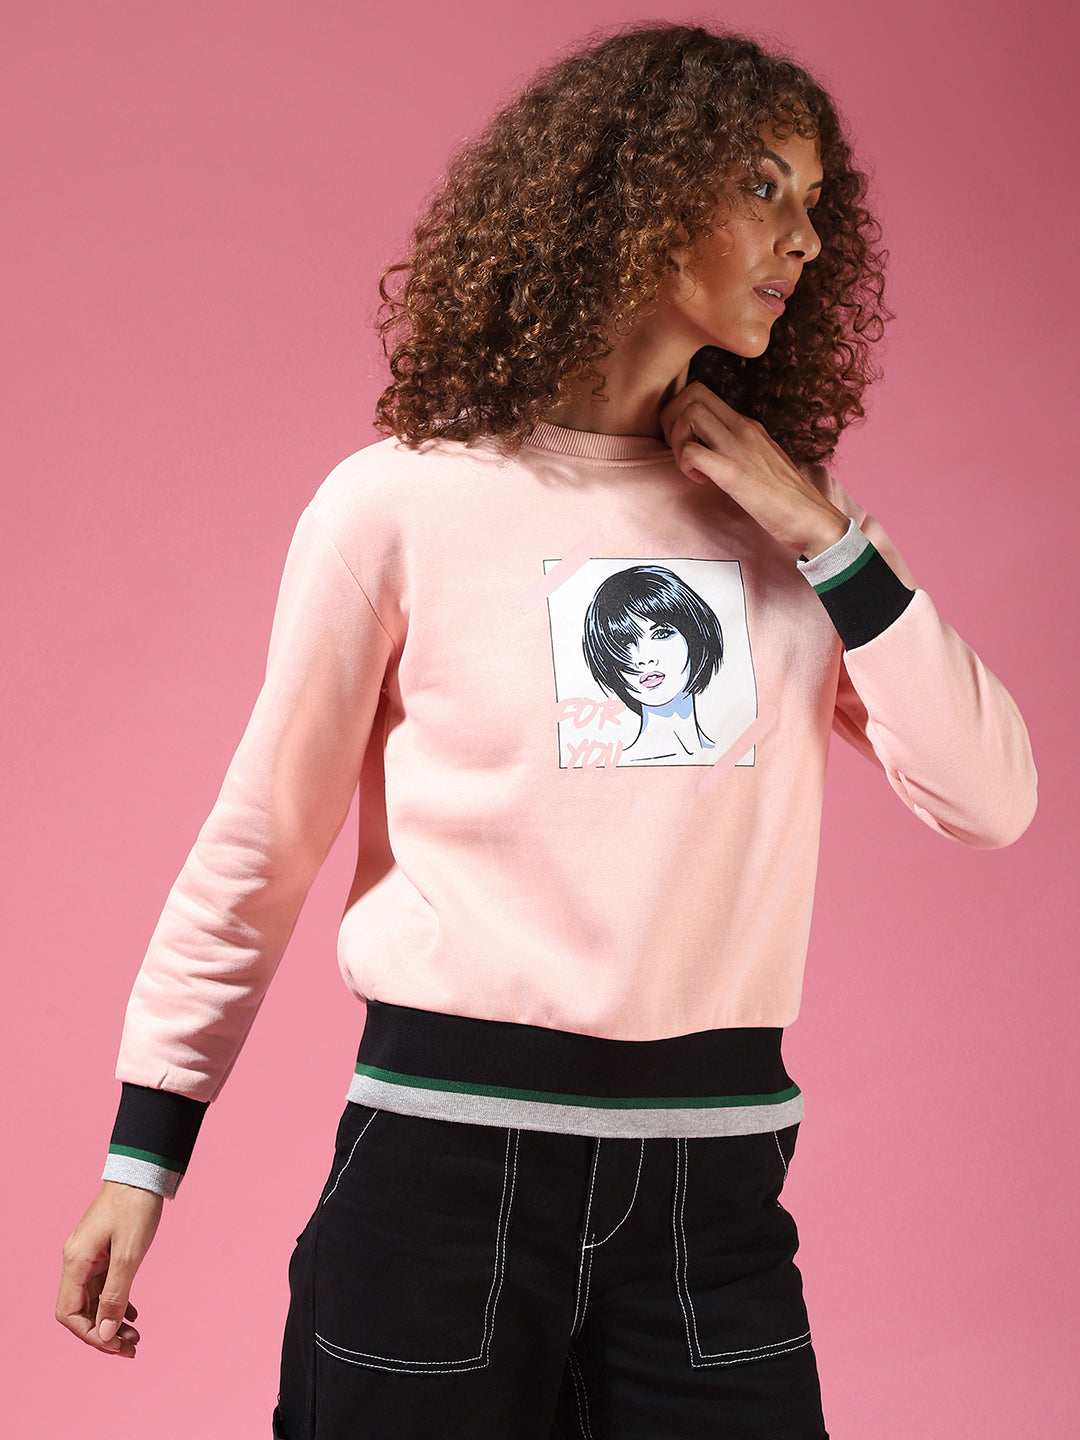 Sweatshirts And Hoodies For Women To Keep Warm In Style